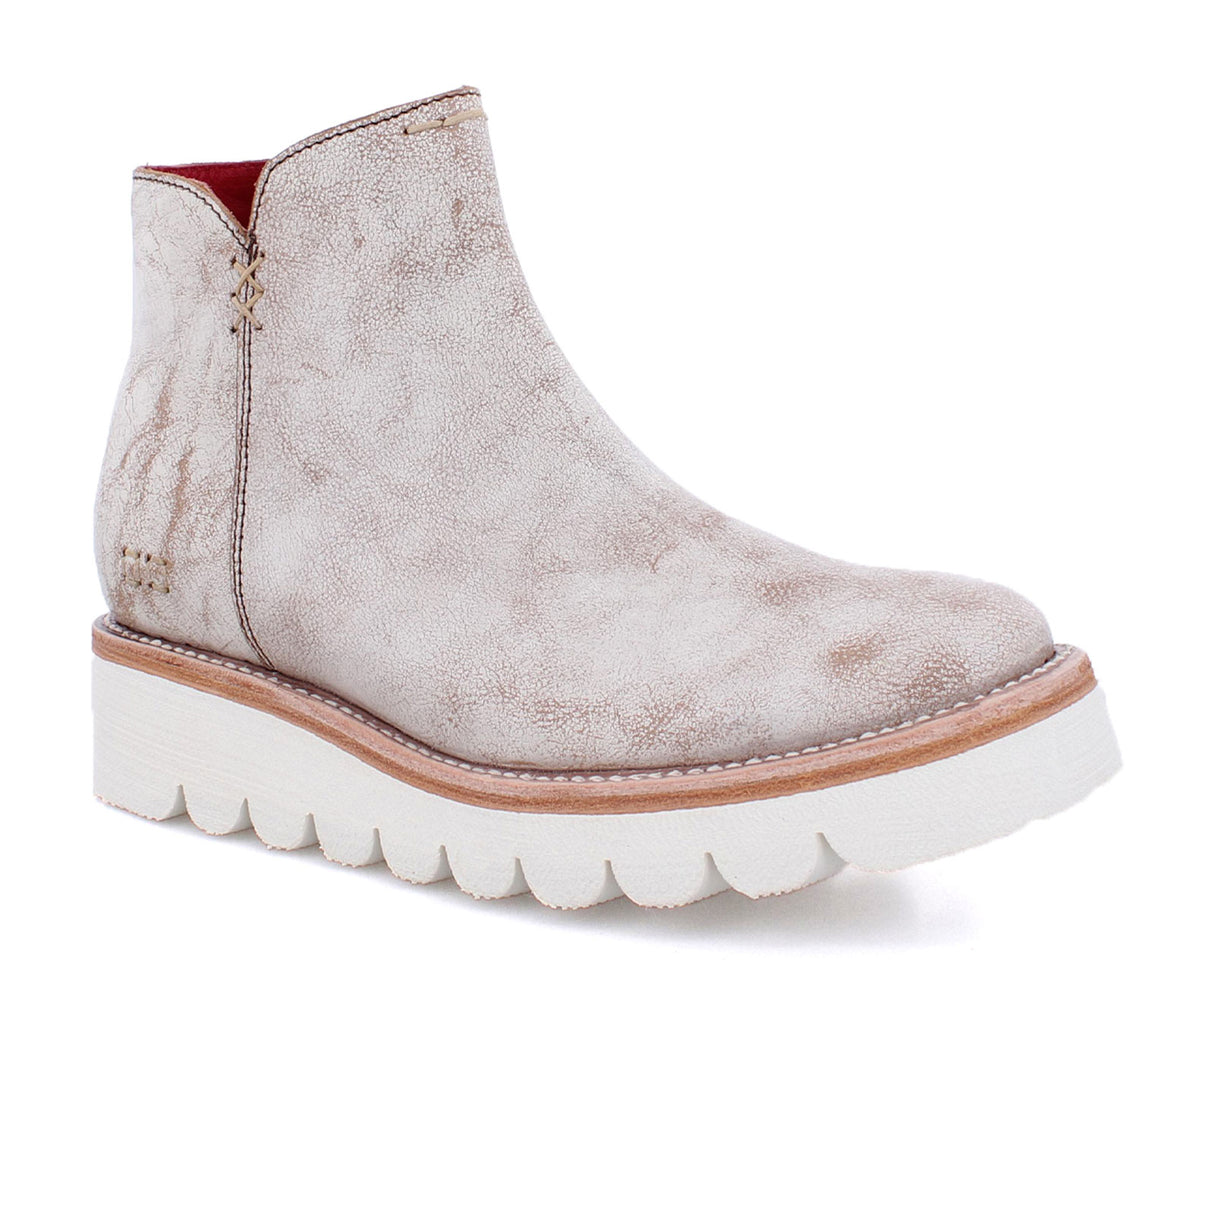 Bed Stu Lydyi Ankle Boot (Women) - Nectar Lux Boots - Casual - Low - The Heel Shoe Fitters